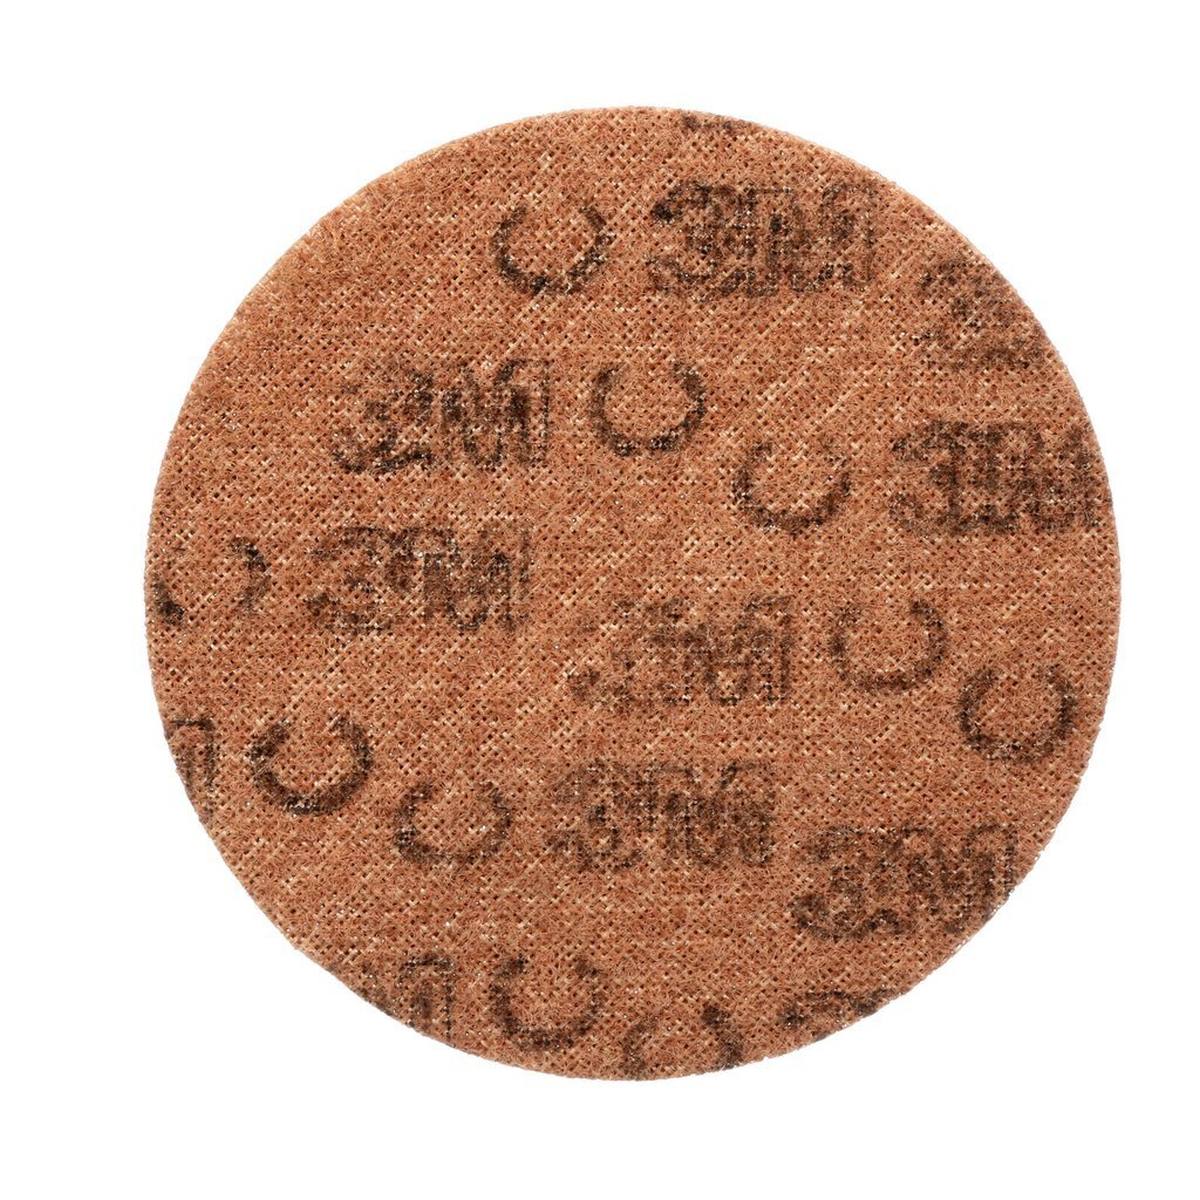 3M Scotch-Brite non-woven disc SC-DH without centering, brown, 125 mm, A, coarse #65334